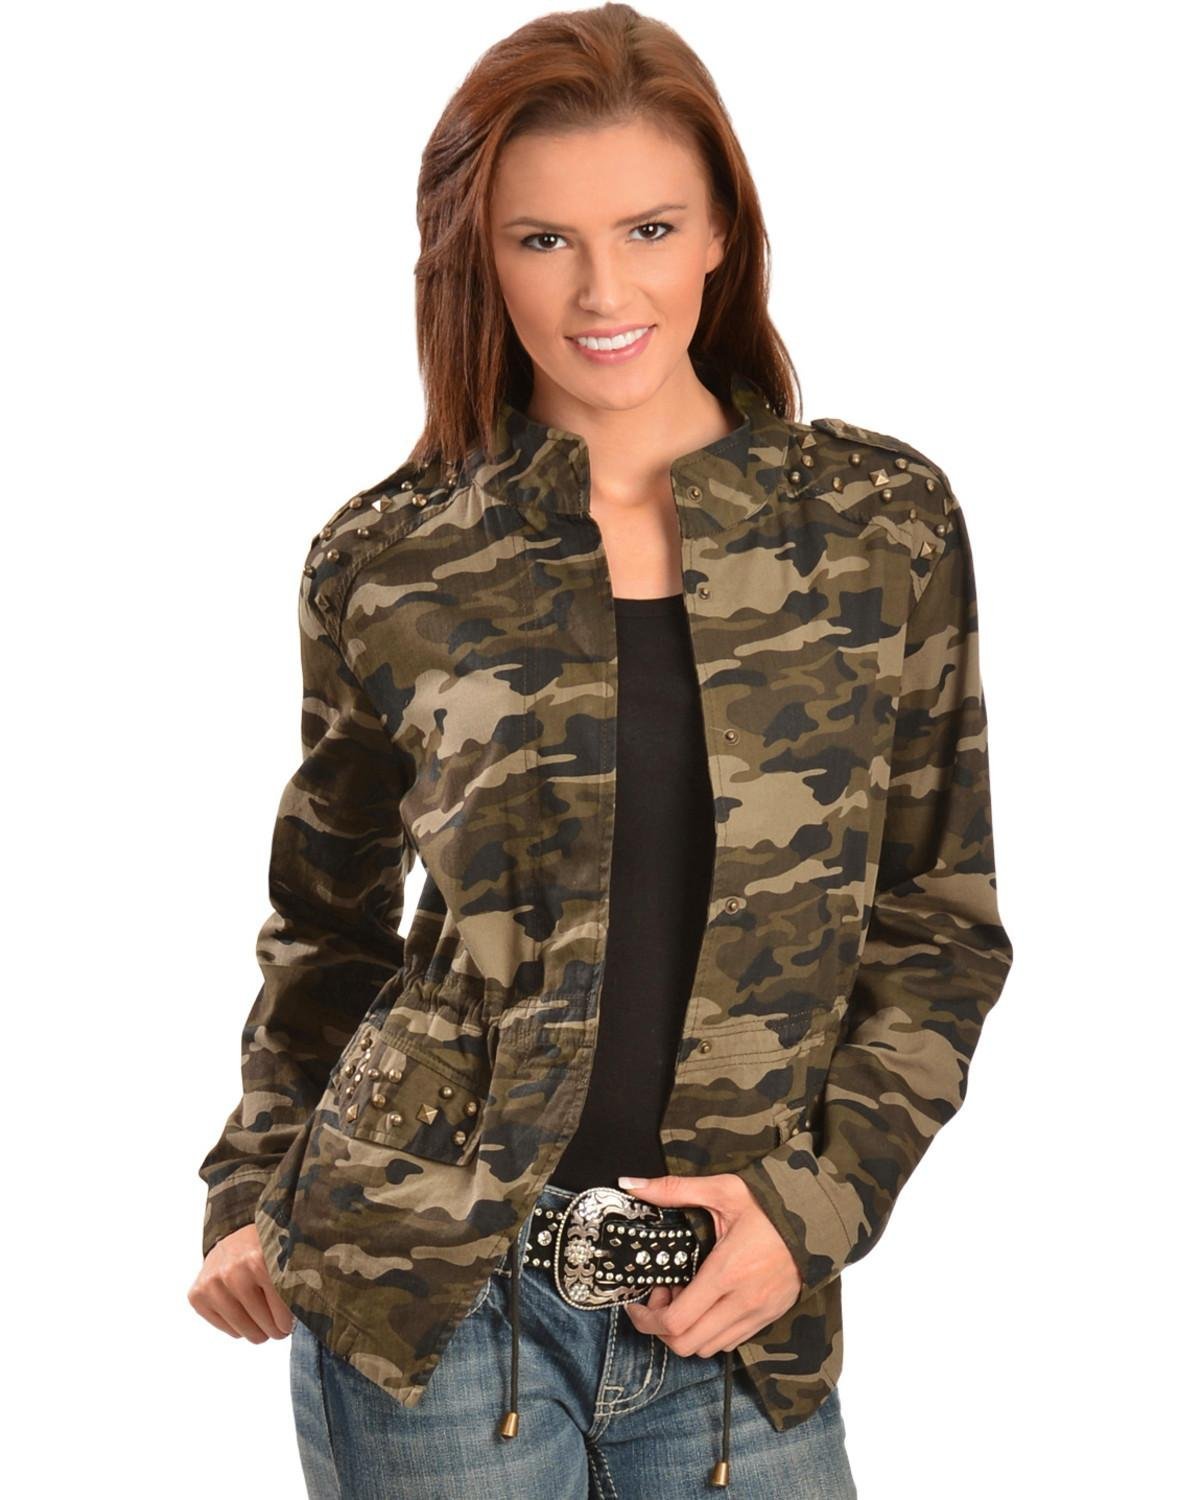 Red Ranch Women's Studded Camo Jacket